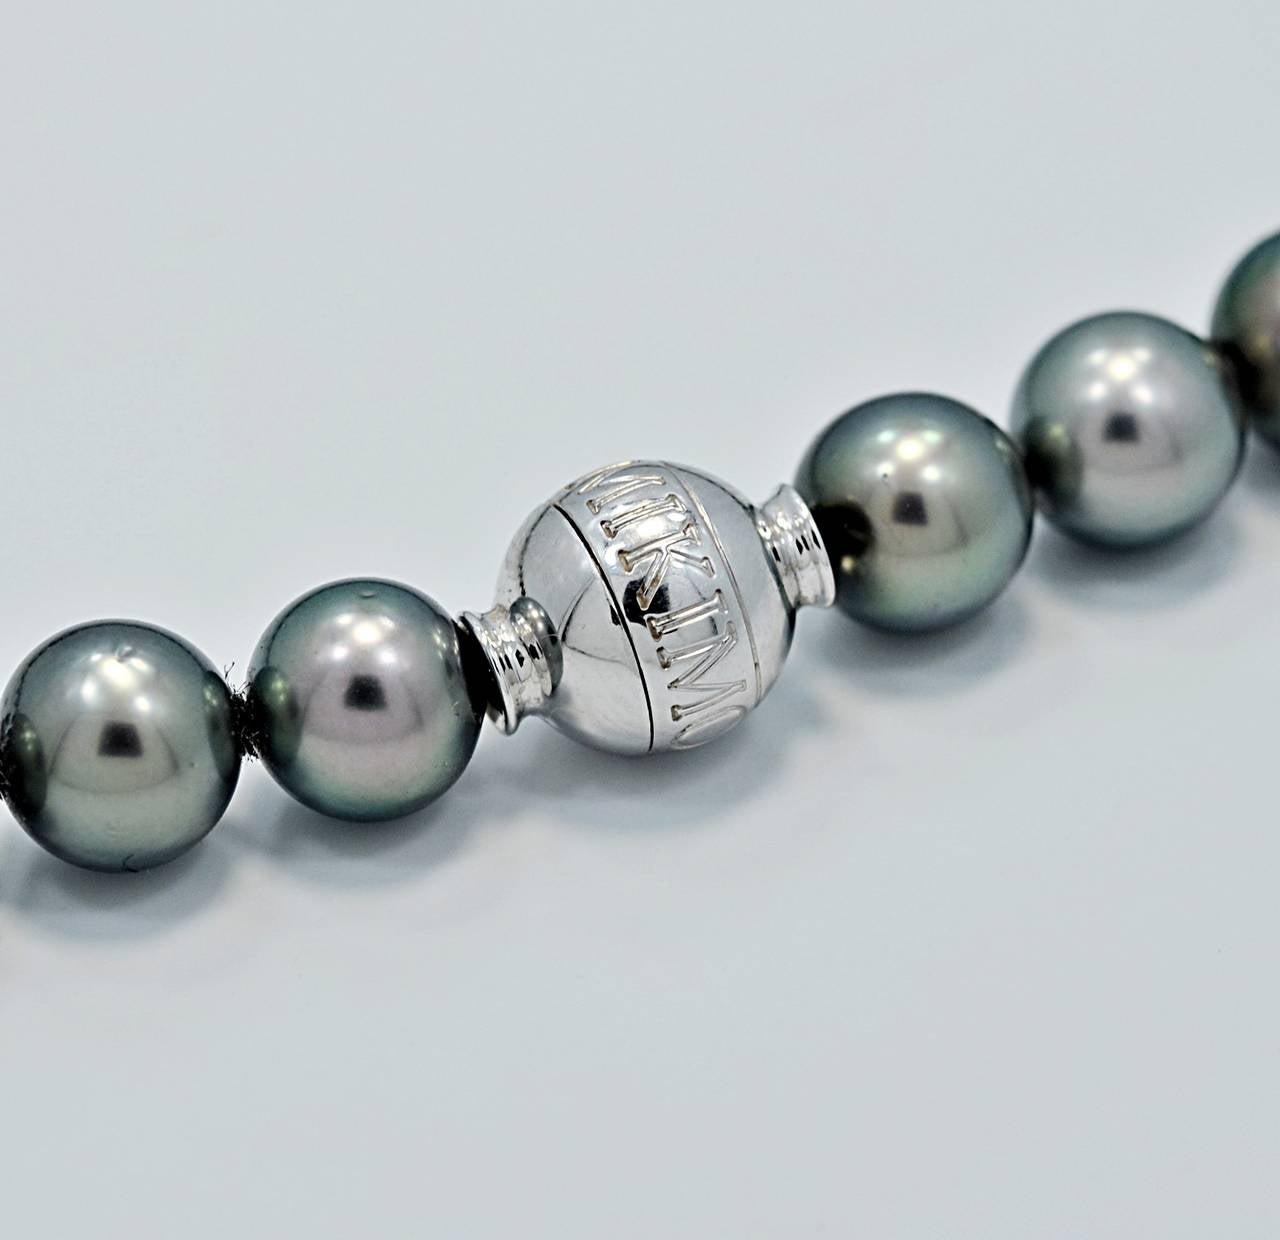 J34076

This is an exquisite and luscious South Sea Black/Peacock Green Mikimoto Strand of Pearls. The clasp is 18k white gold and has a small diamond. The pearls measure 8.2mm - 10.5mm and are perfectly round and color matched. The strand